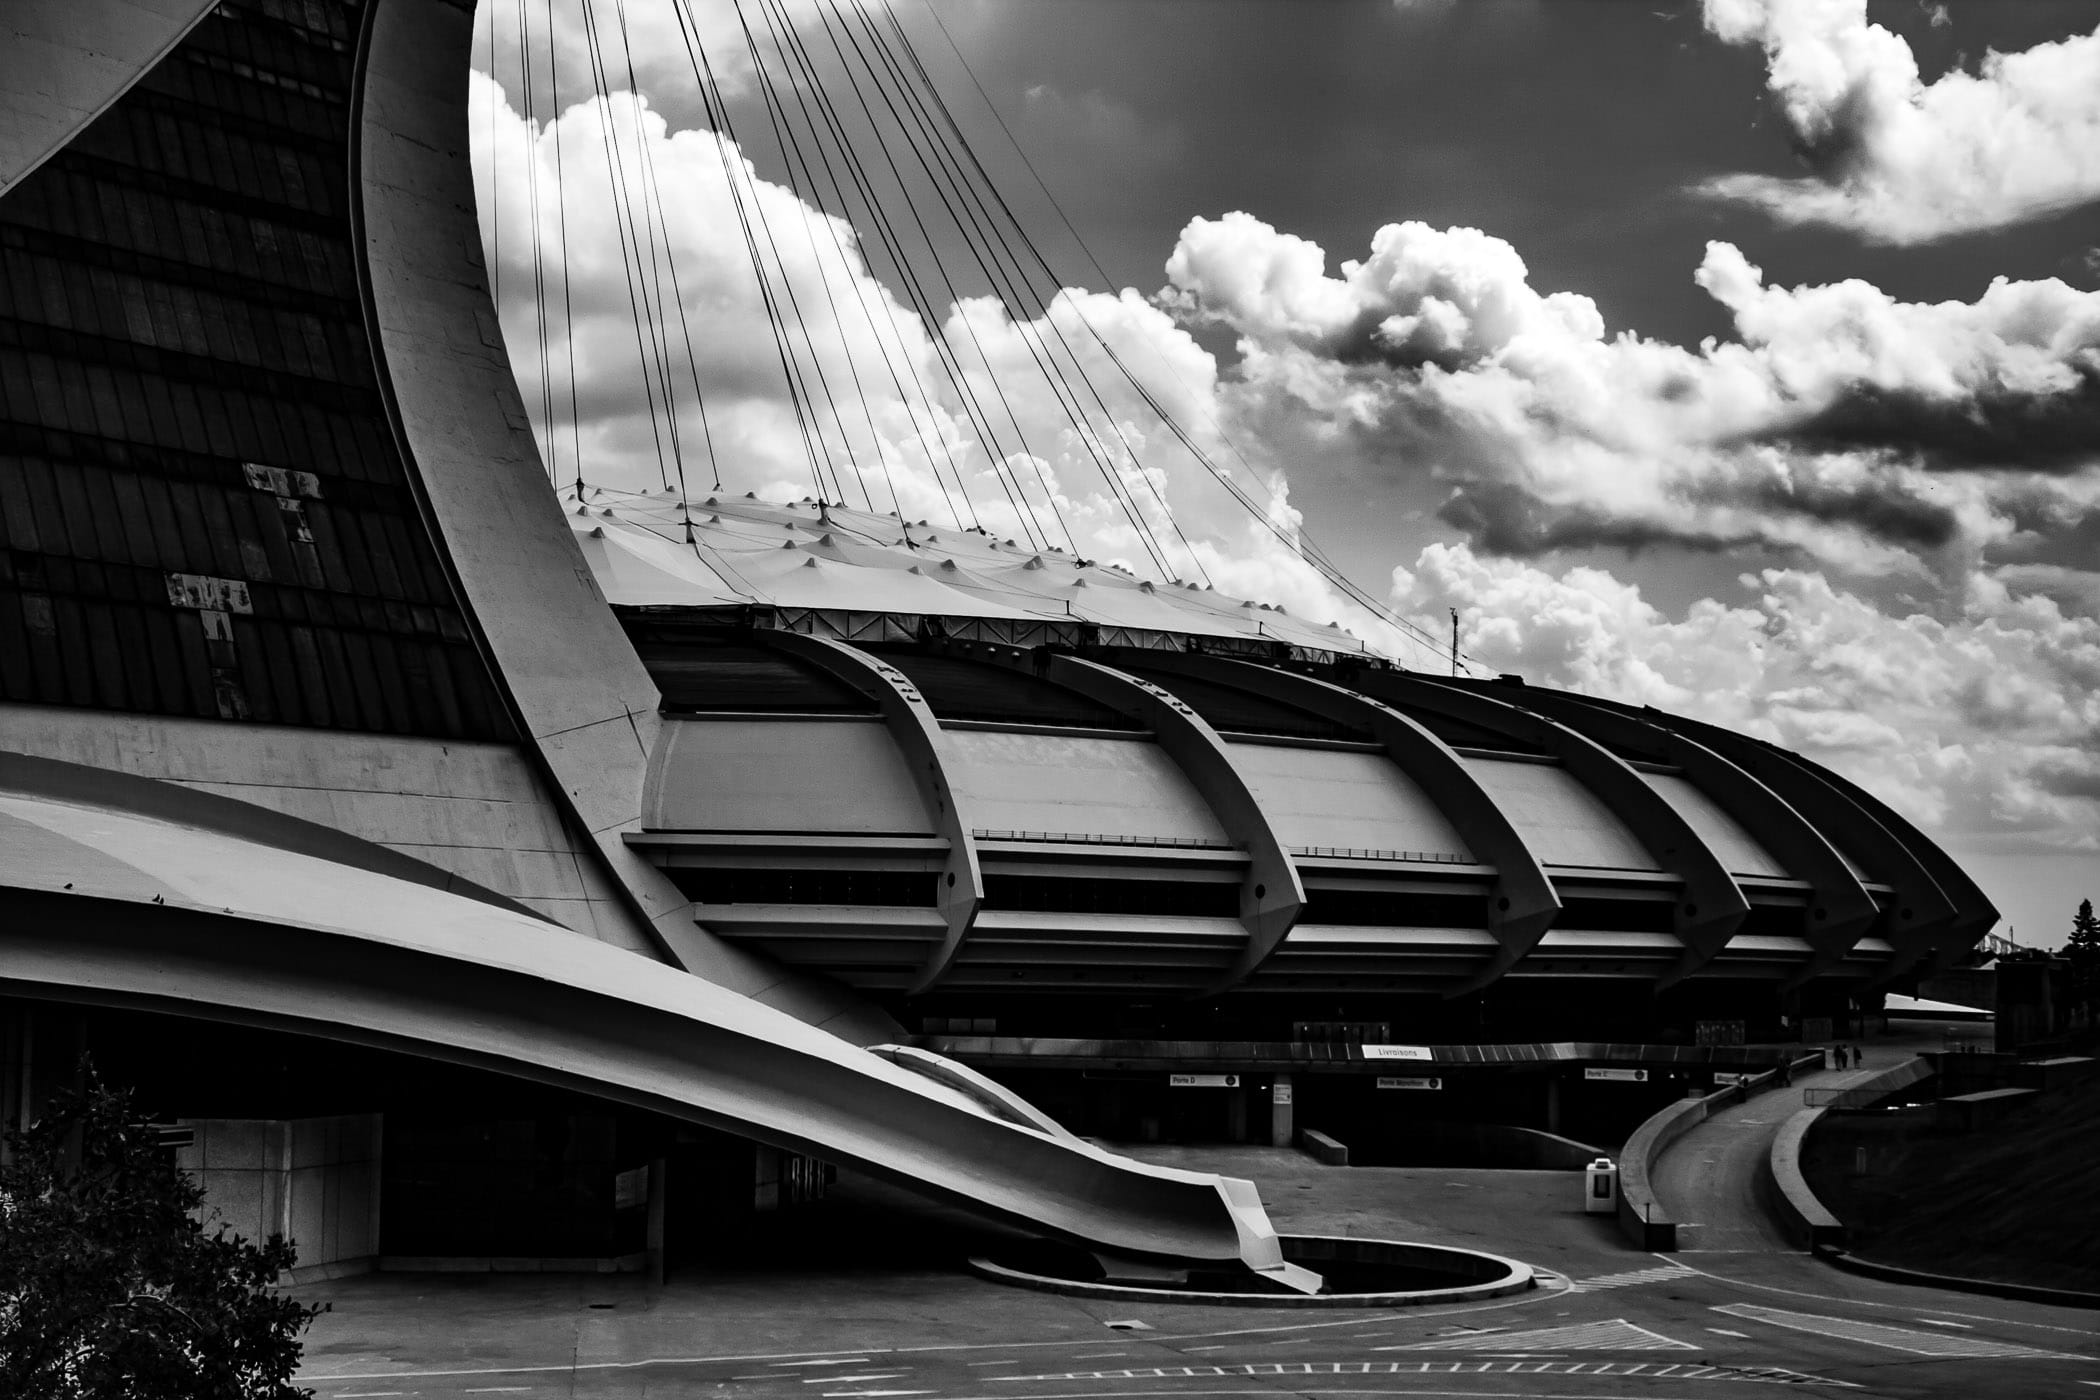 Montréal's Stade Olympique, lying in disrepair since the Expos decamped to Washington in 2004, resembles an alien craft in this shot.